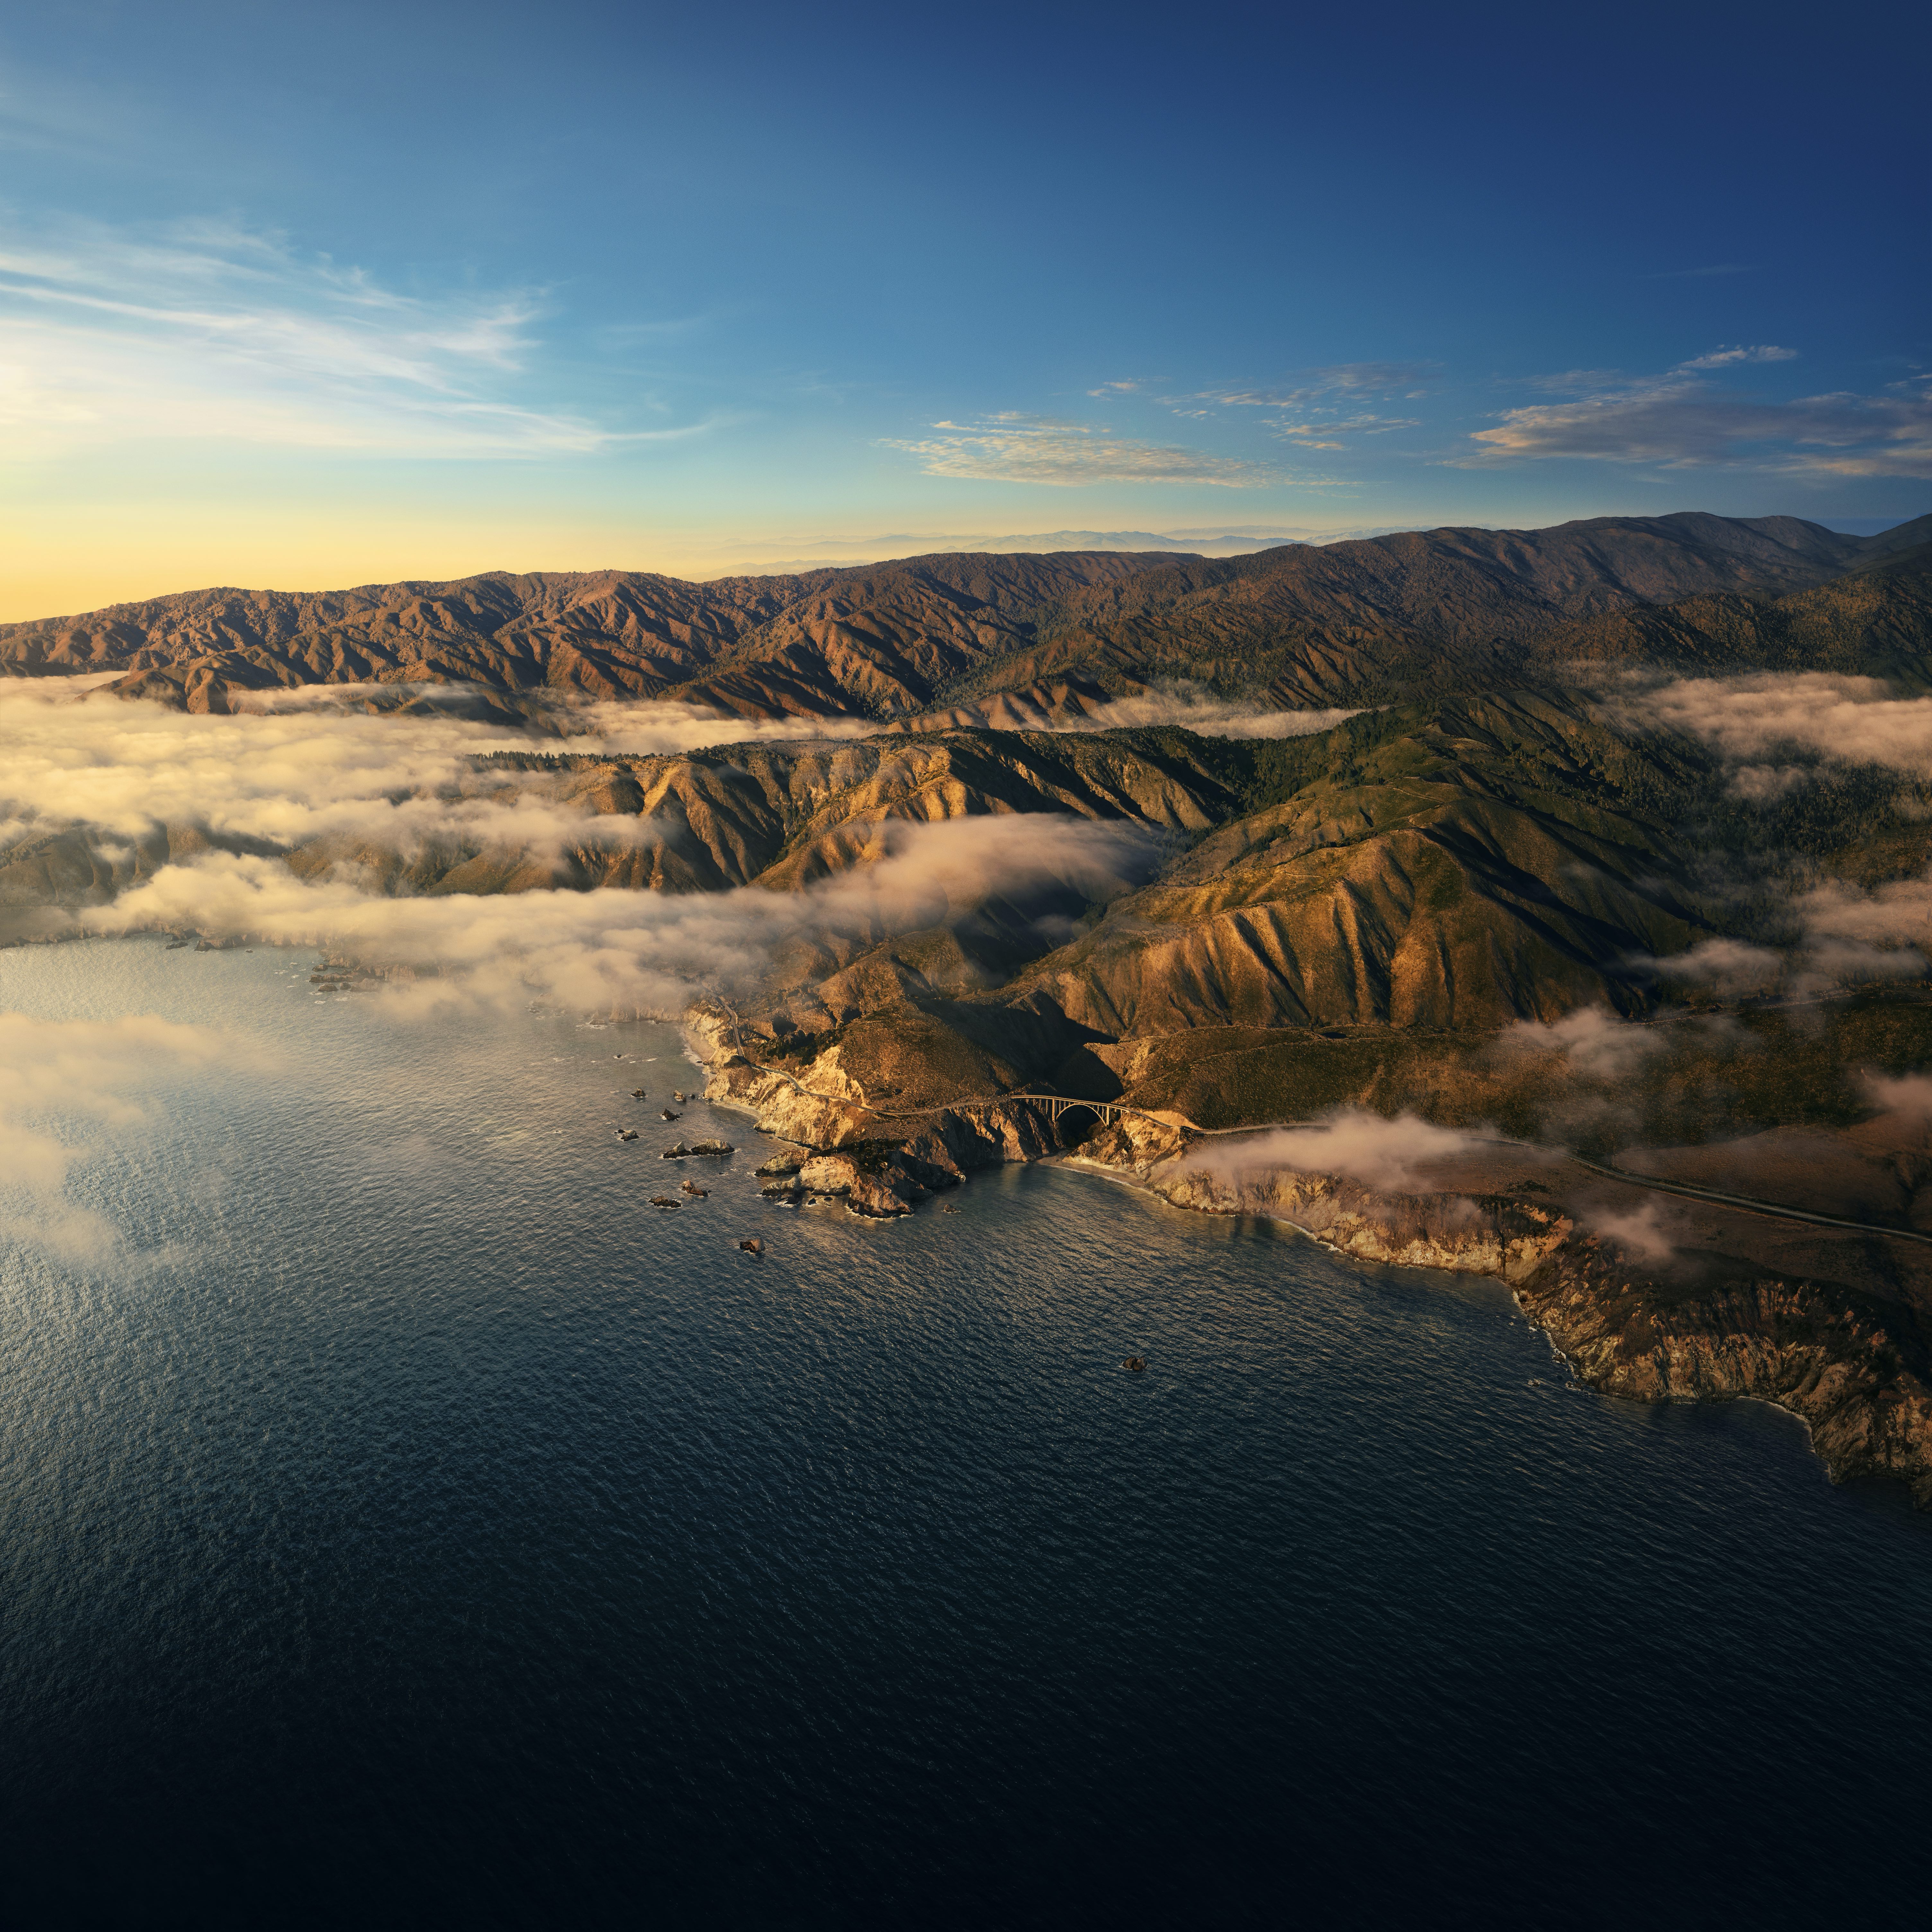 macOS Big Sur wallpapers for desktop, iPhone, and iPad